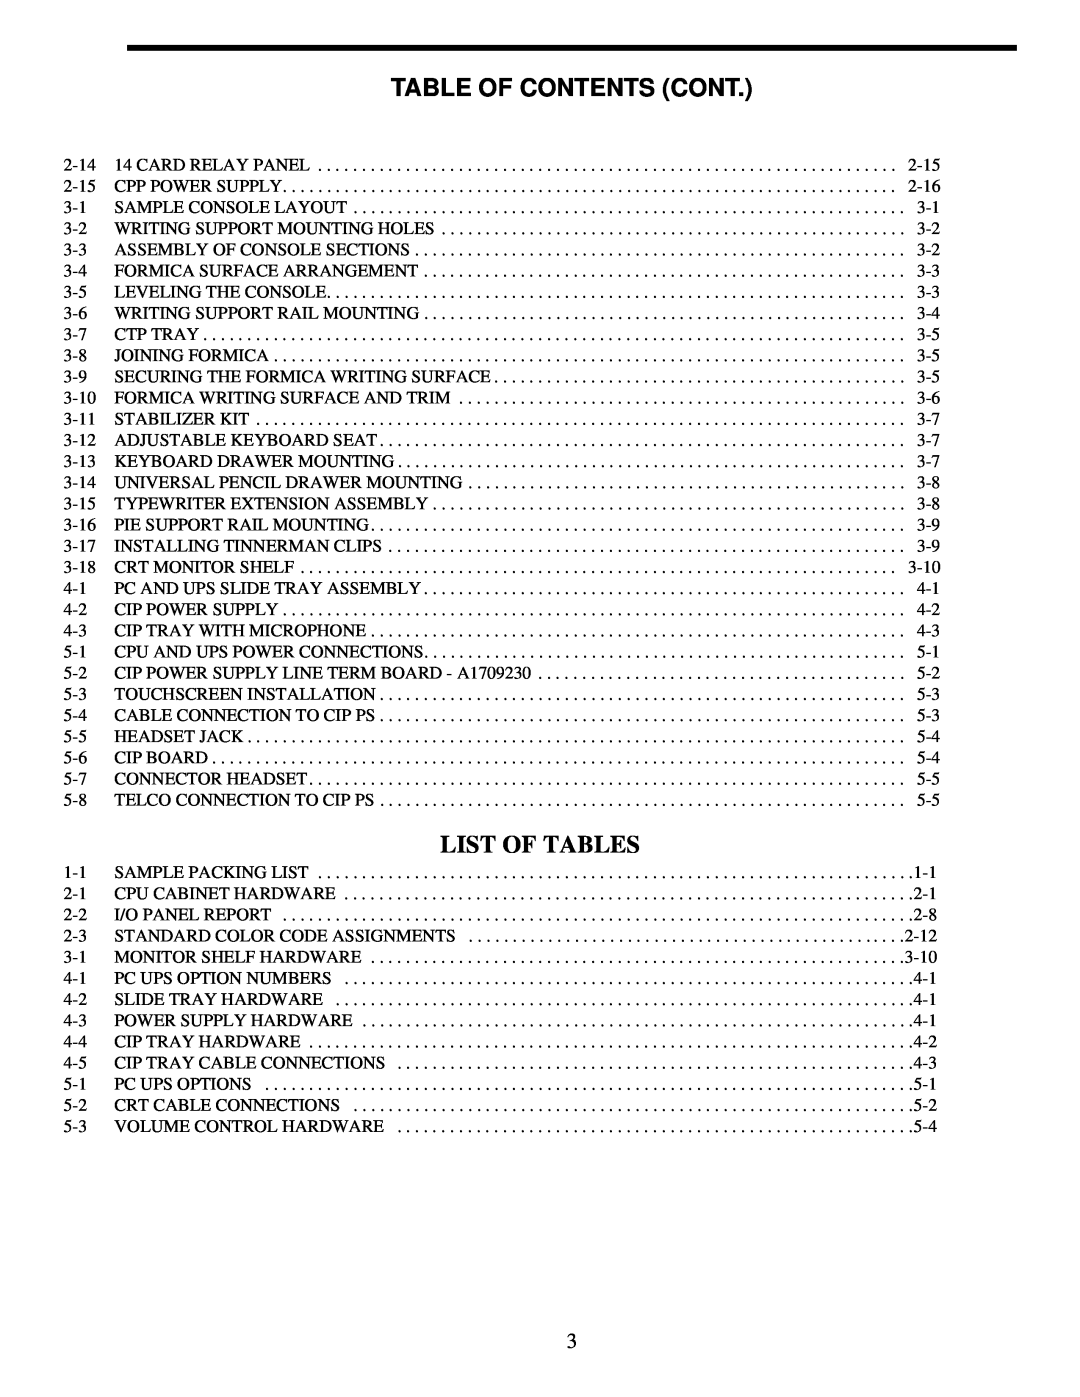 EFJohnson VR-CM50 manual List Of Tables, Table Of Contents Cont 